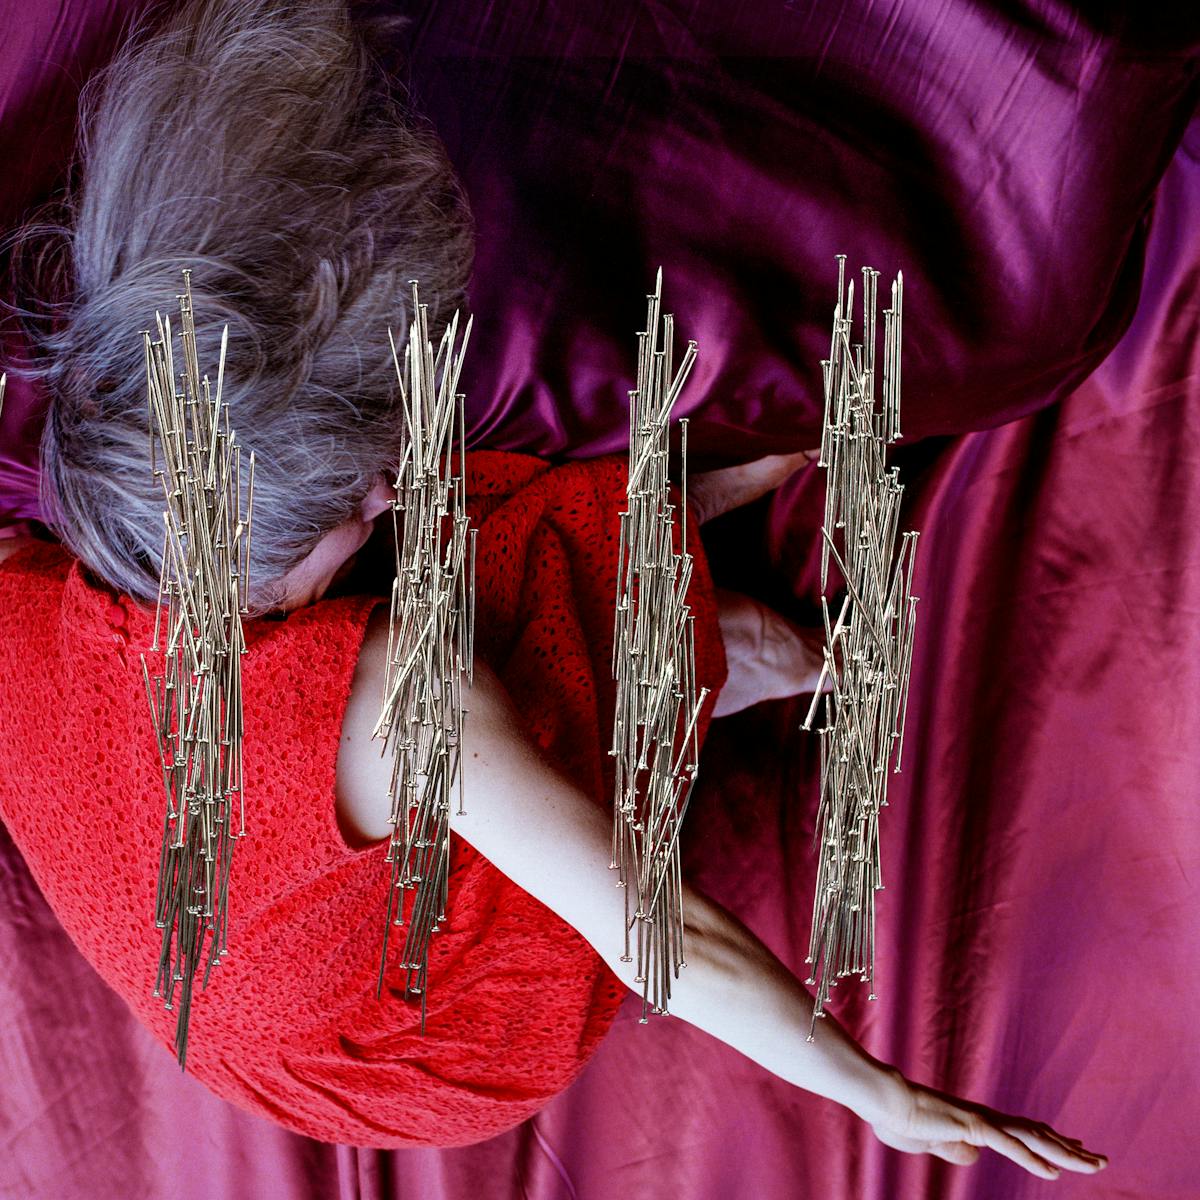 Artwork created with a colour photographic print of a female figure in a bright red dress, set against a purple and blue draped silk background. The figure is on her side, curled up with her knees raised to her chest. Her arms are extended out behind her back, bent at the elbow, with the fingers stretched out. Her body is covered by groups of dress pins, laid on top of the photographic print. The pins are arranged in 5 groups. In each group the pins are arranged vertically to form neat rectangles. They resemble 5 pillars.